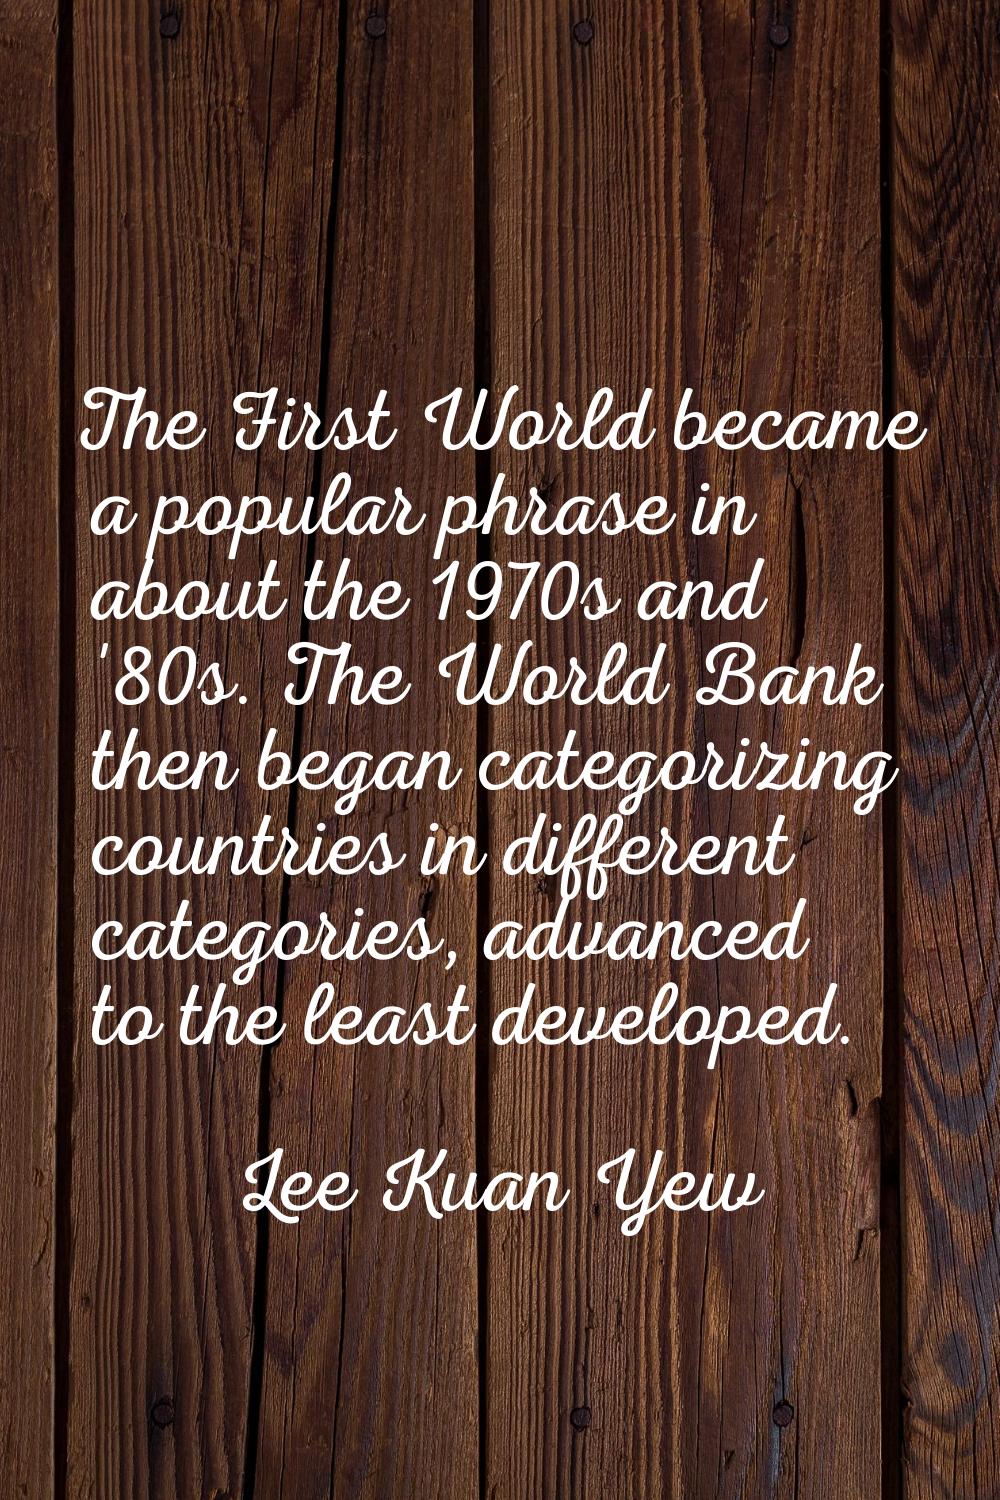 The First World became a popular phrase in about the 1970s and '80s. The World Bank then began cate